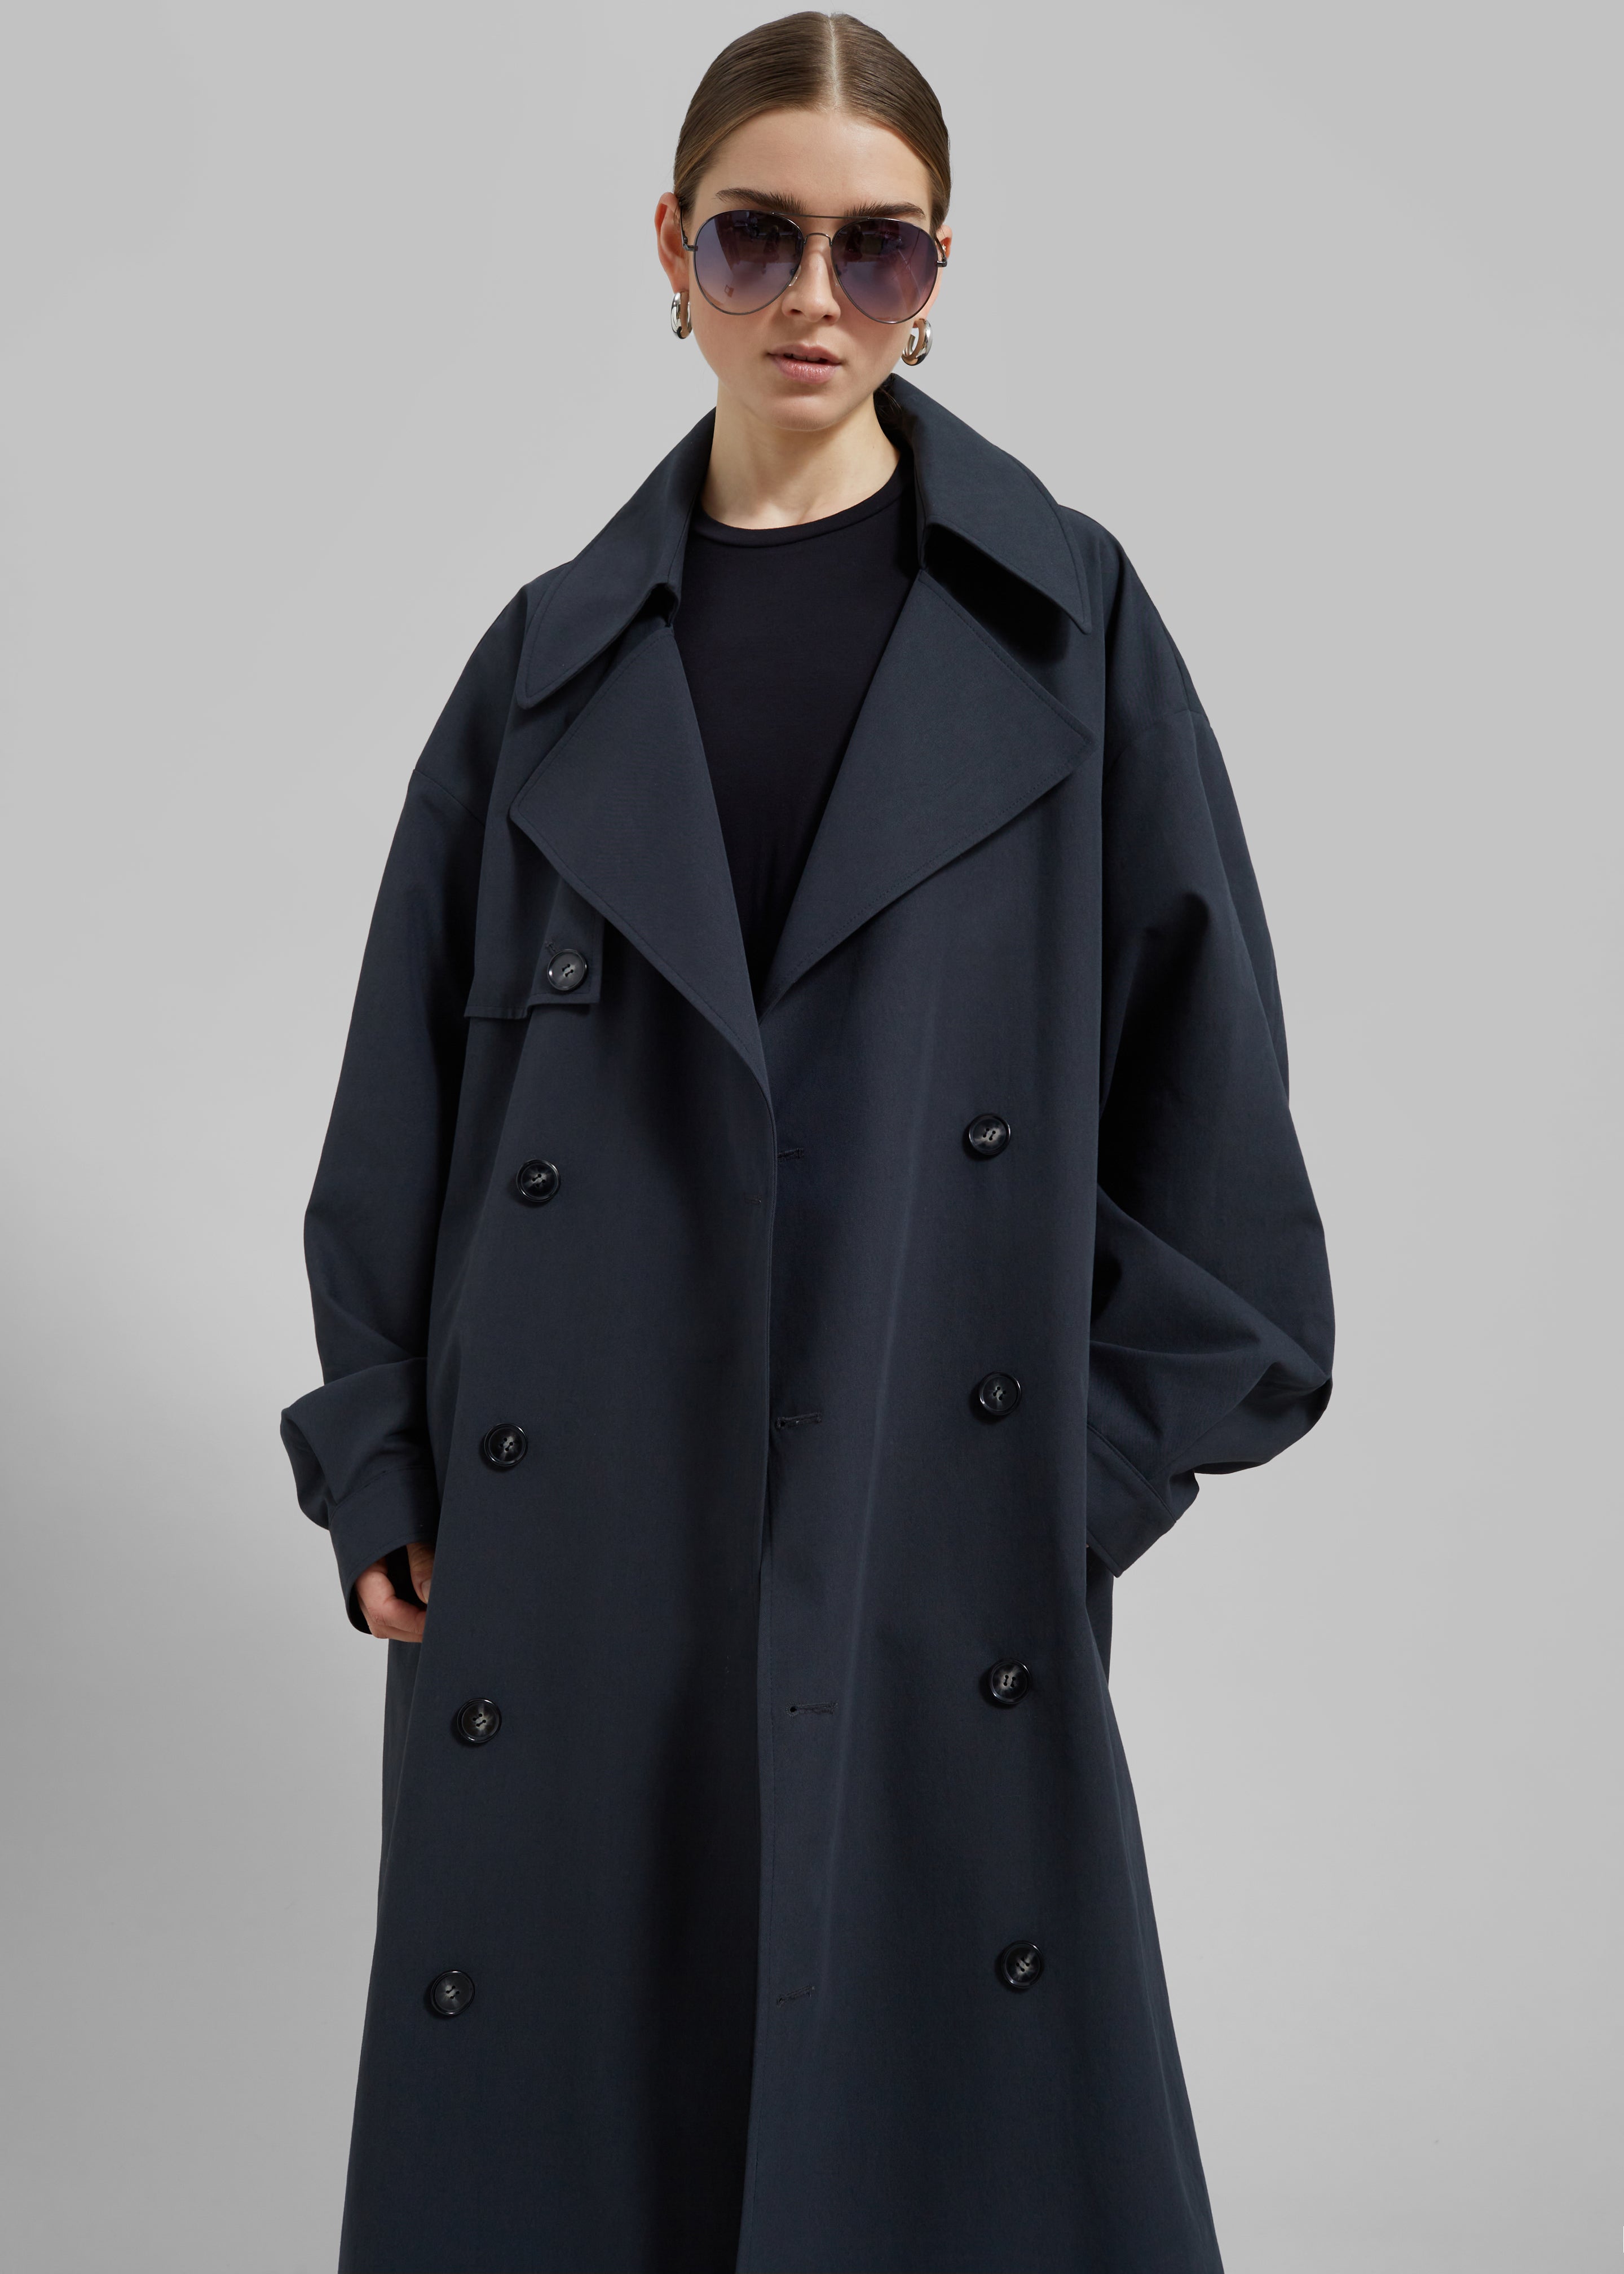 Anika Double Breasted Trench Coat - Navy - 6